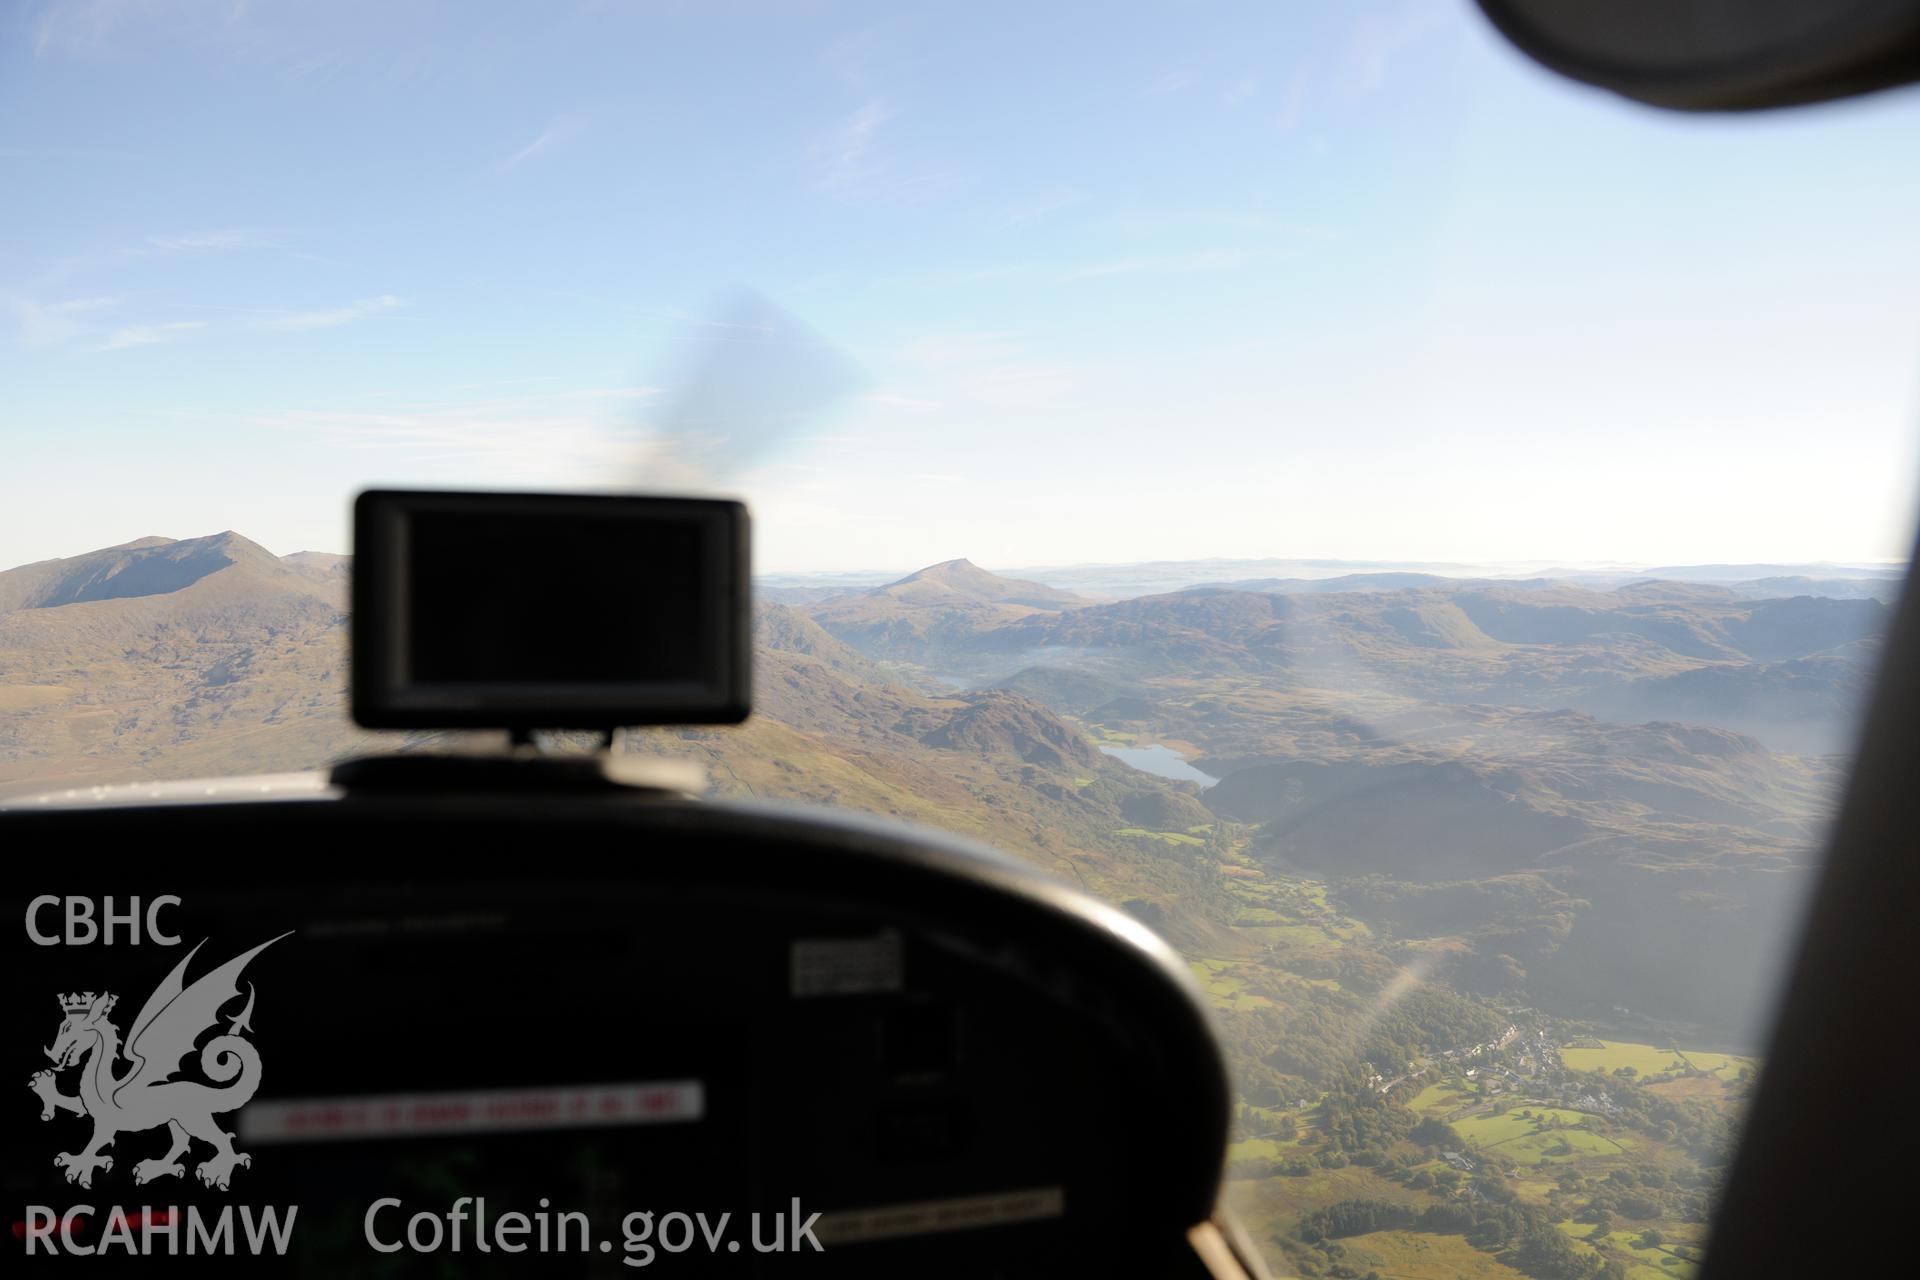 Beddgelert, at the foot of Moel Hebog in the Glaslyn valley, with Moel y Dyniewyd and Snowdon beyond. Oblique aerial photograph taken during the Royal Commission's programme of archaeological aerial reconnaissance by Toby Driver on 2nd October 2015.